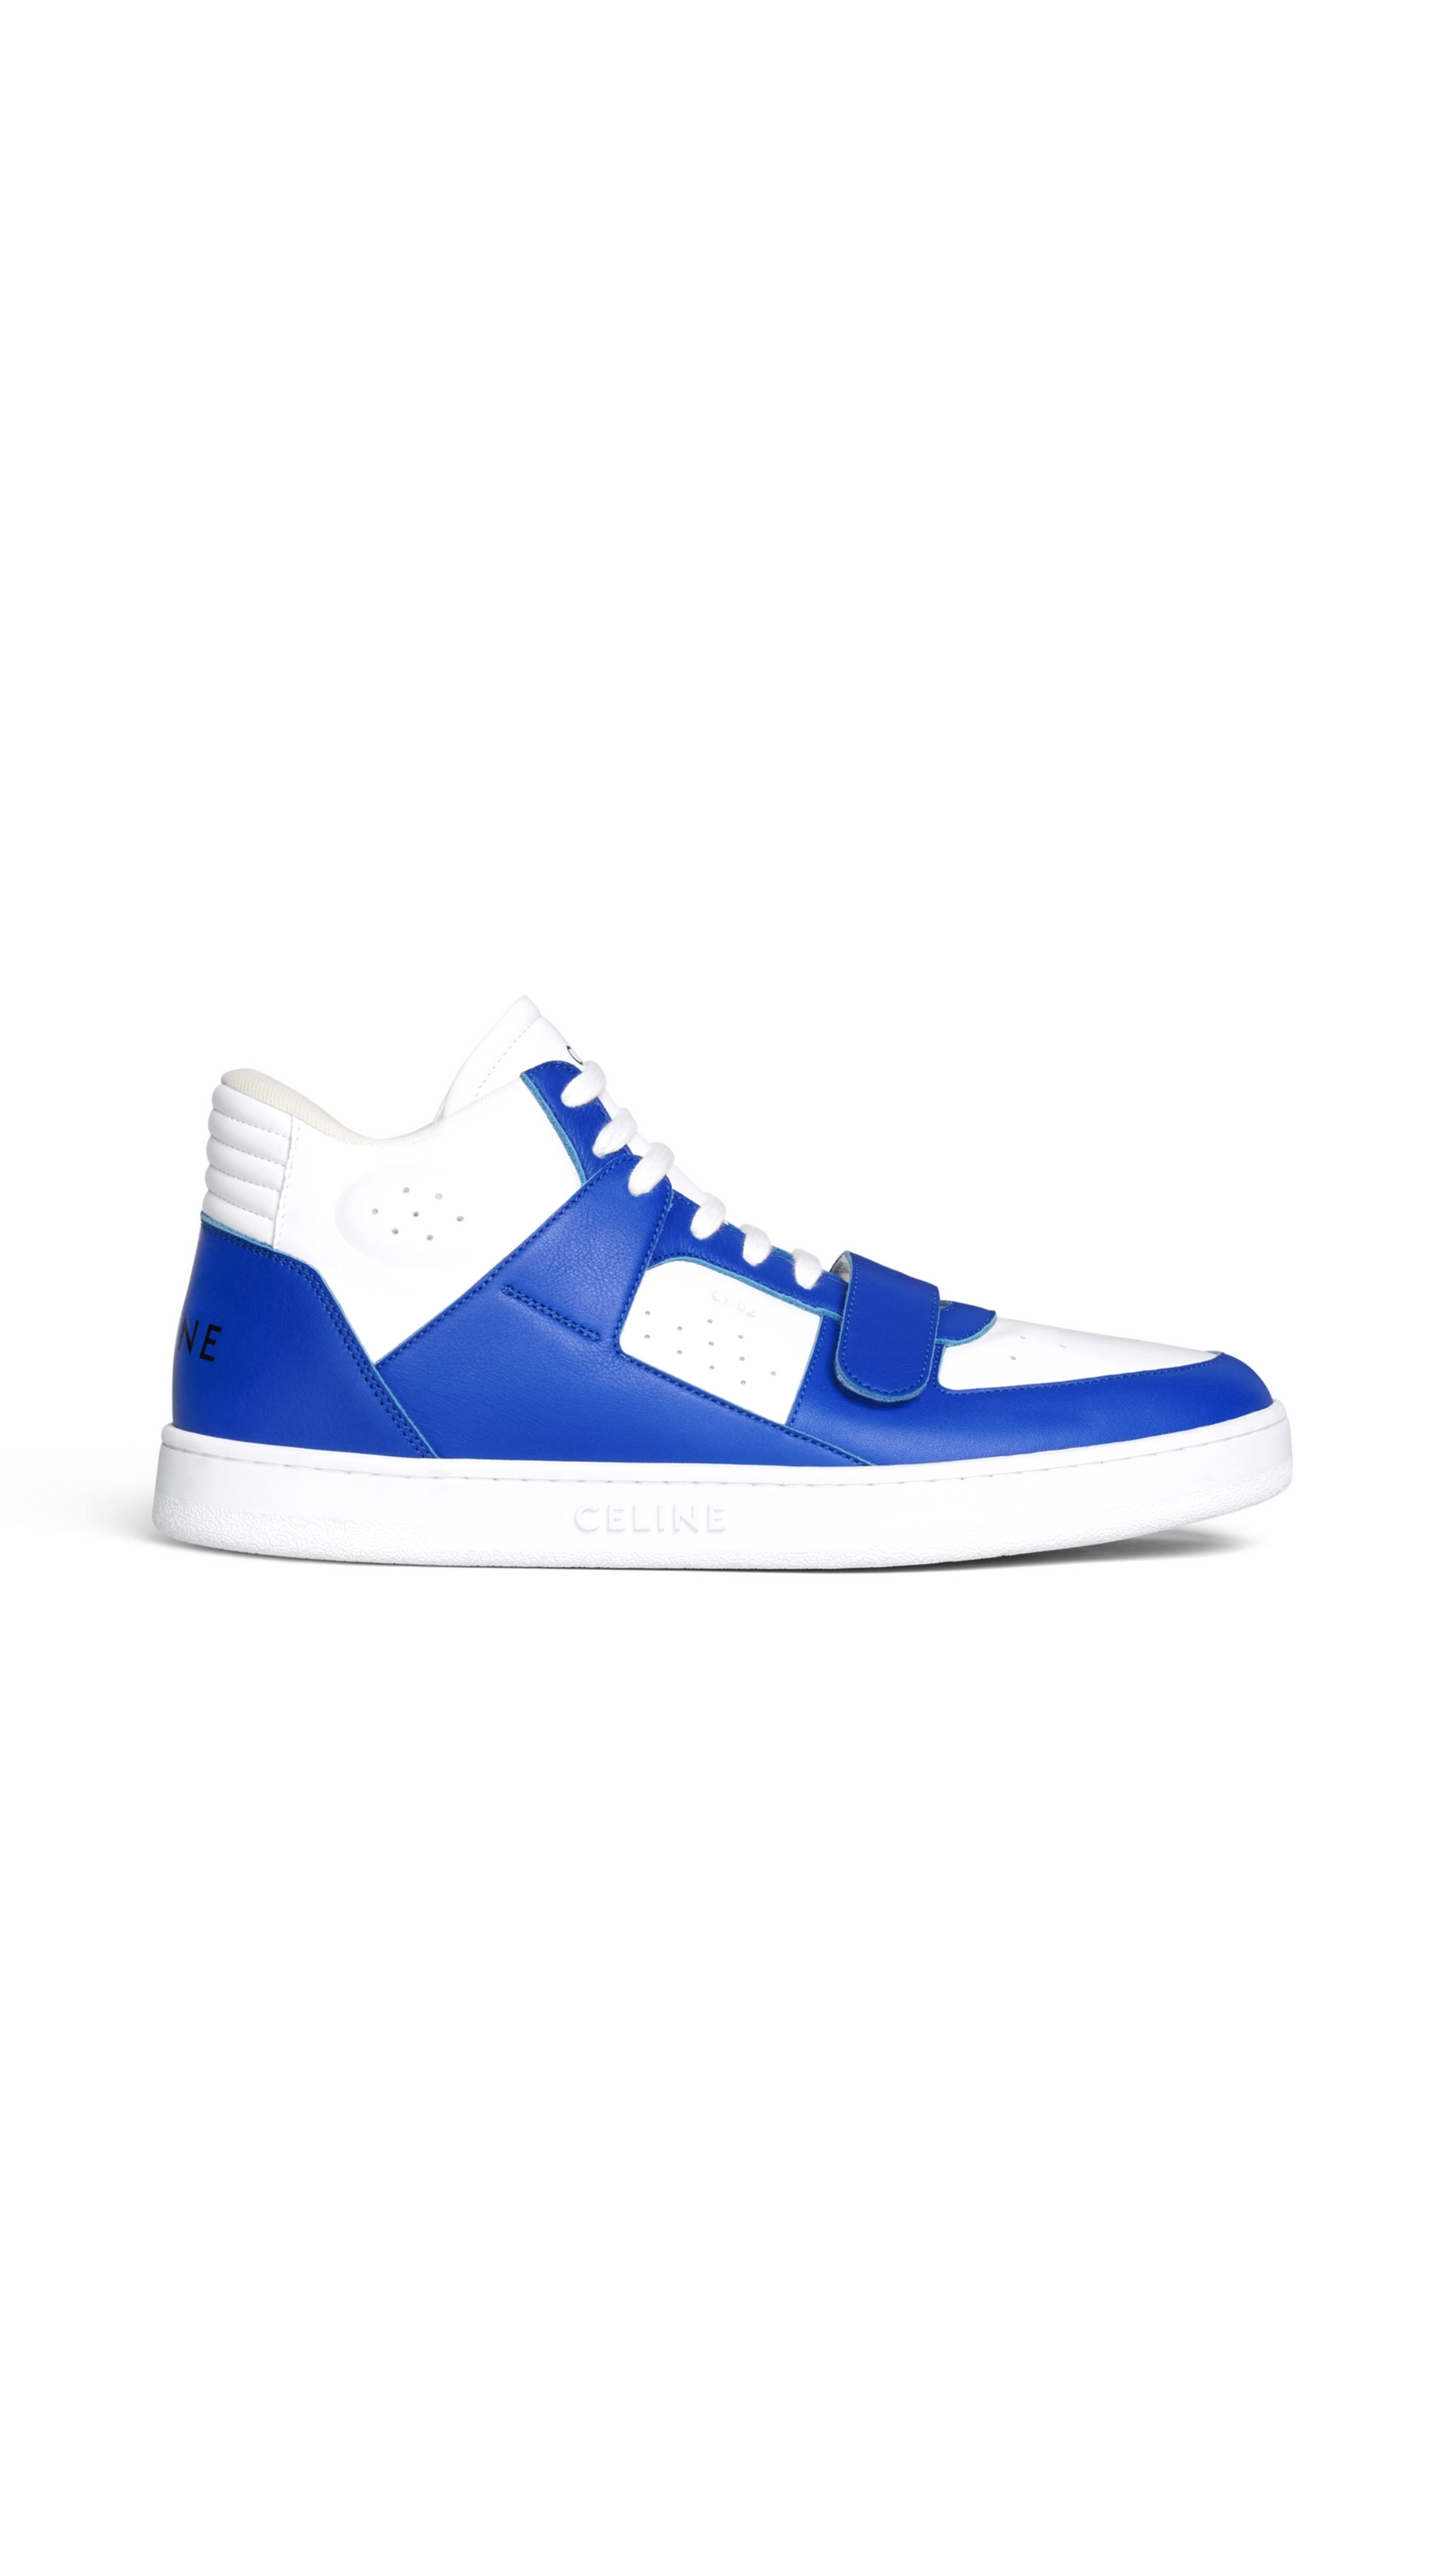 CT-02 Trainer Mid Sneaker with Scratch in calfskin - Optic White/Blue